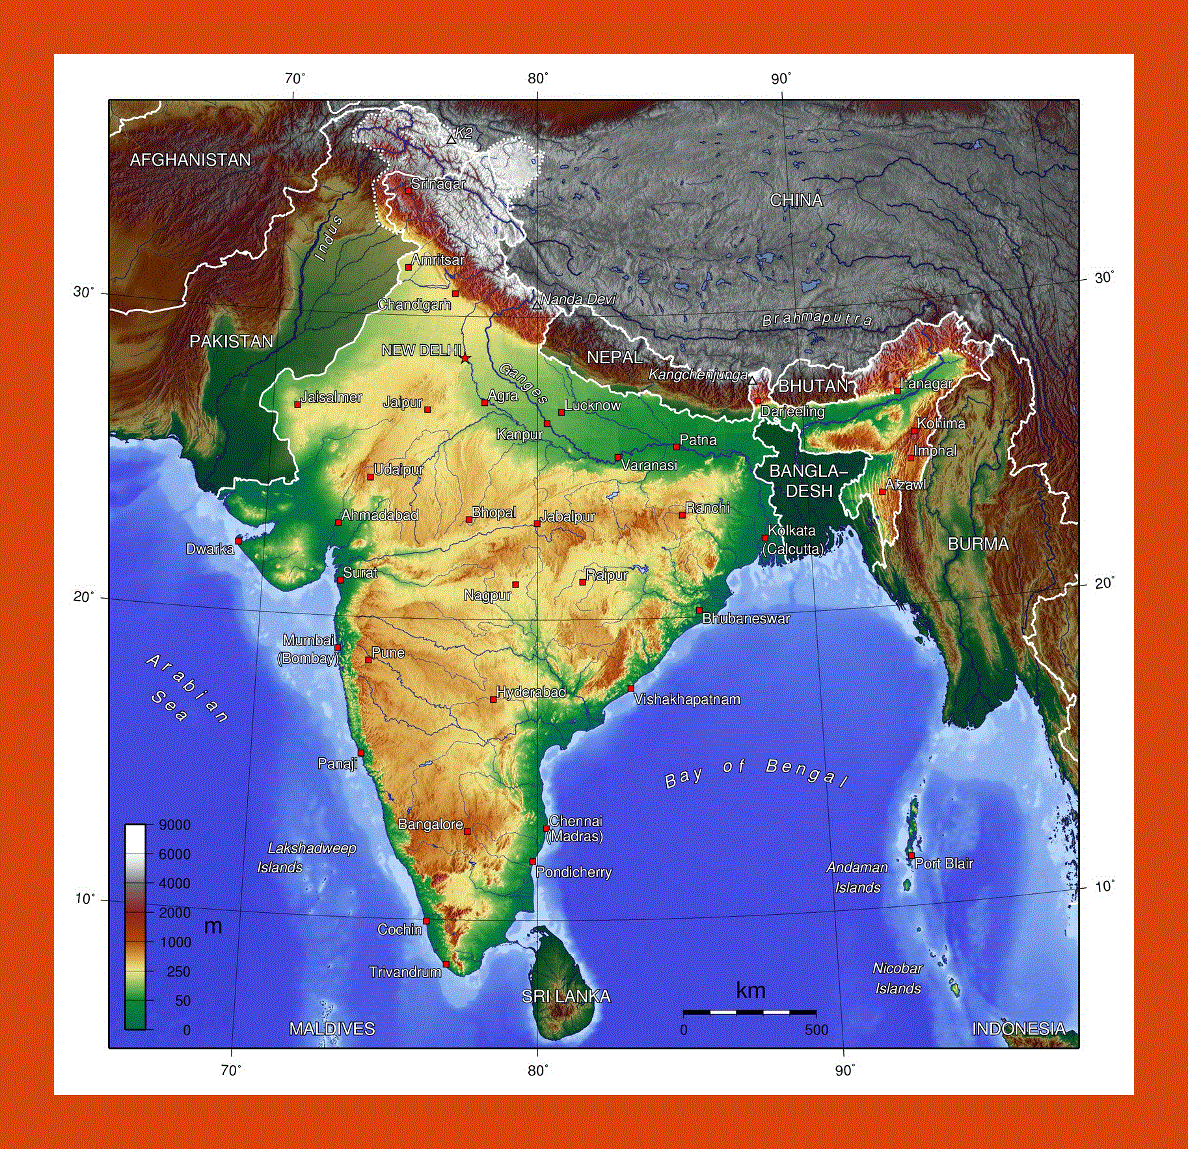 Topographical map of India